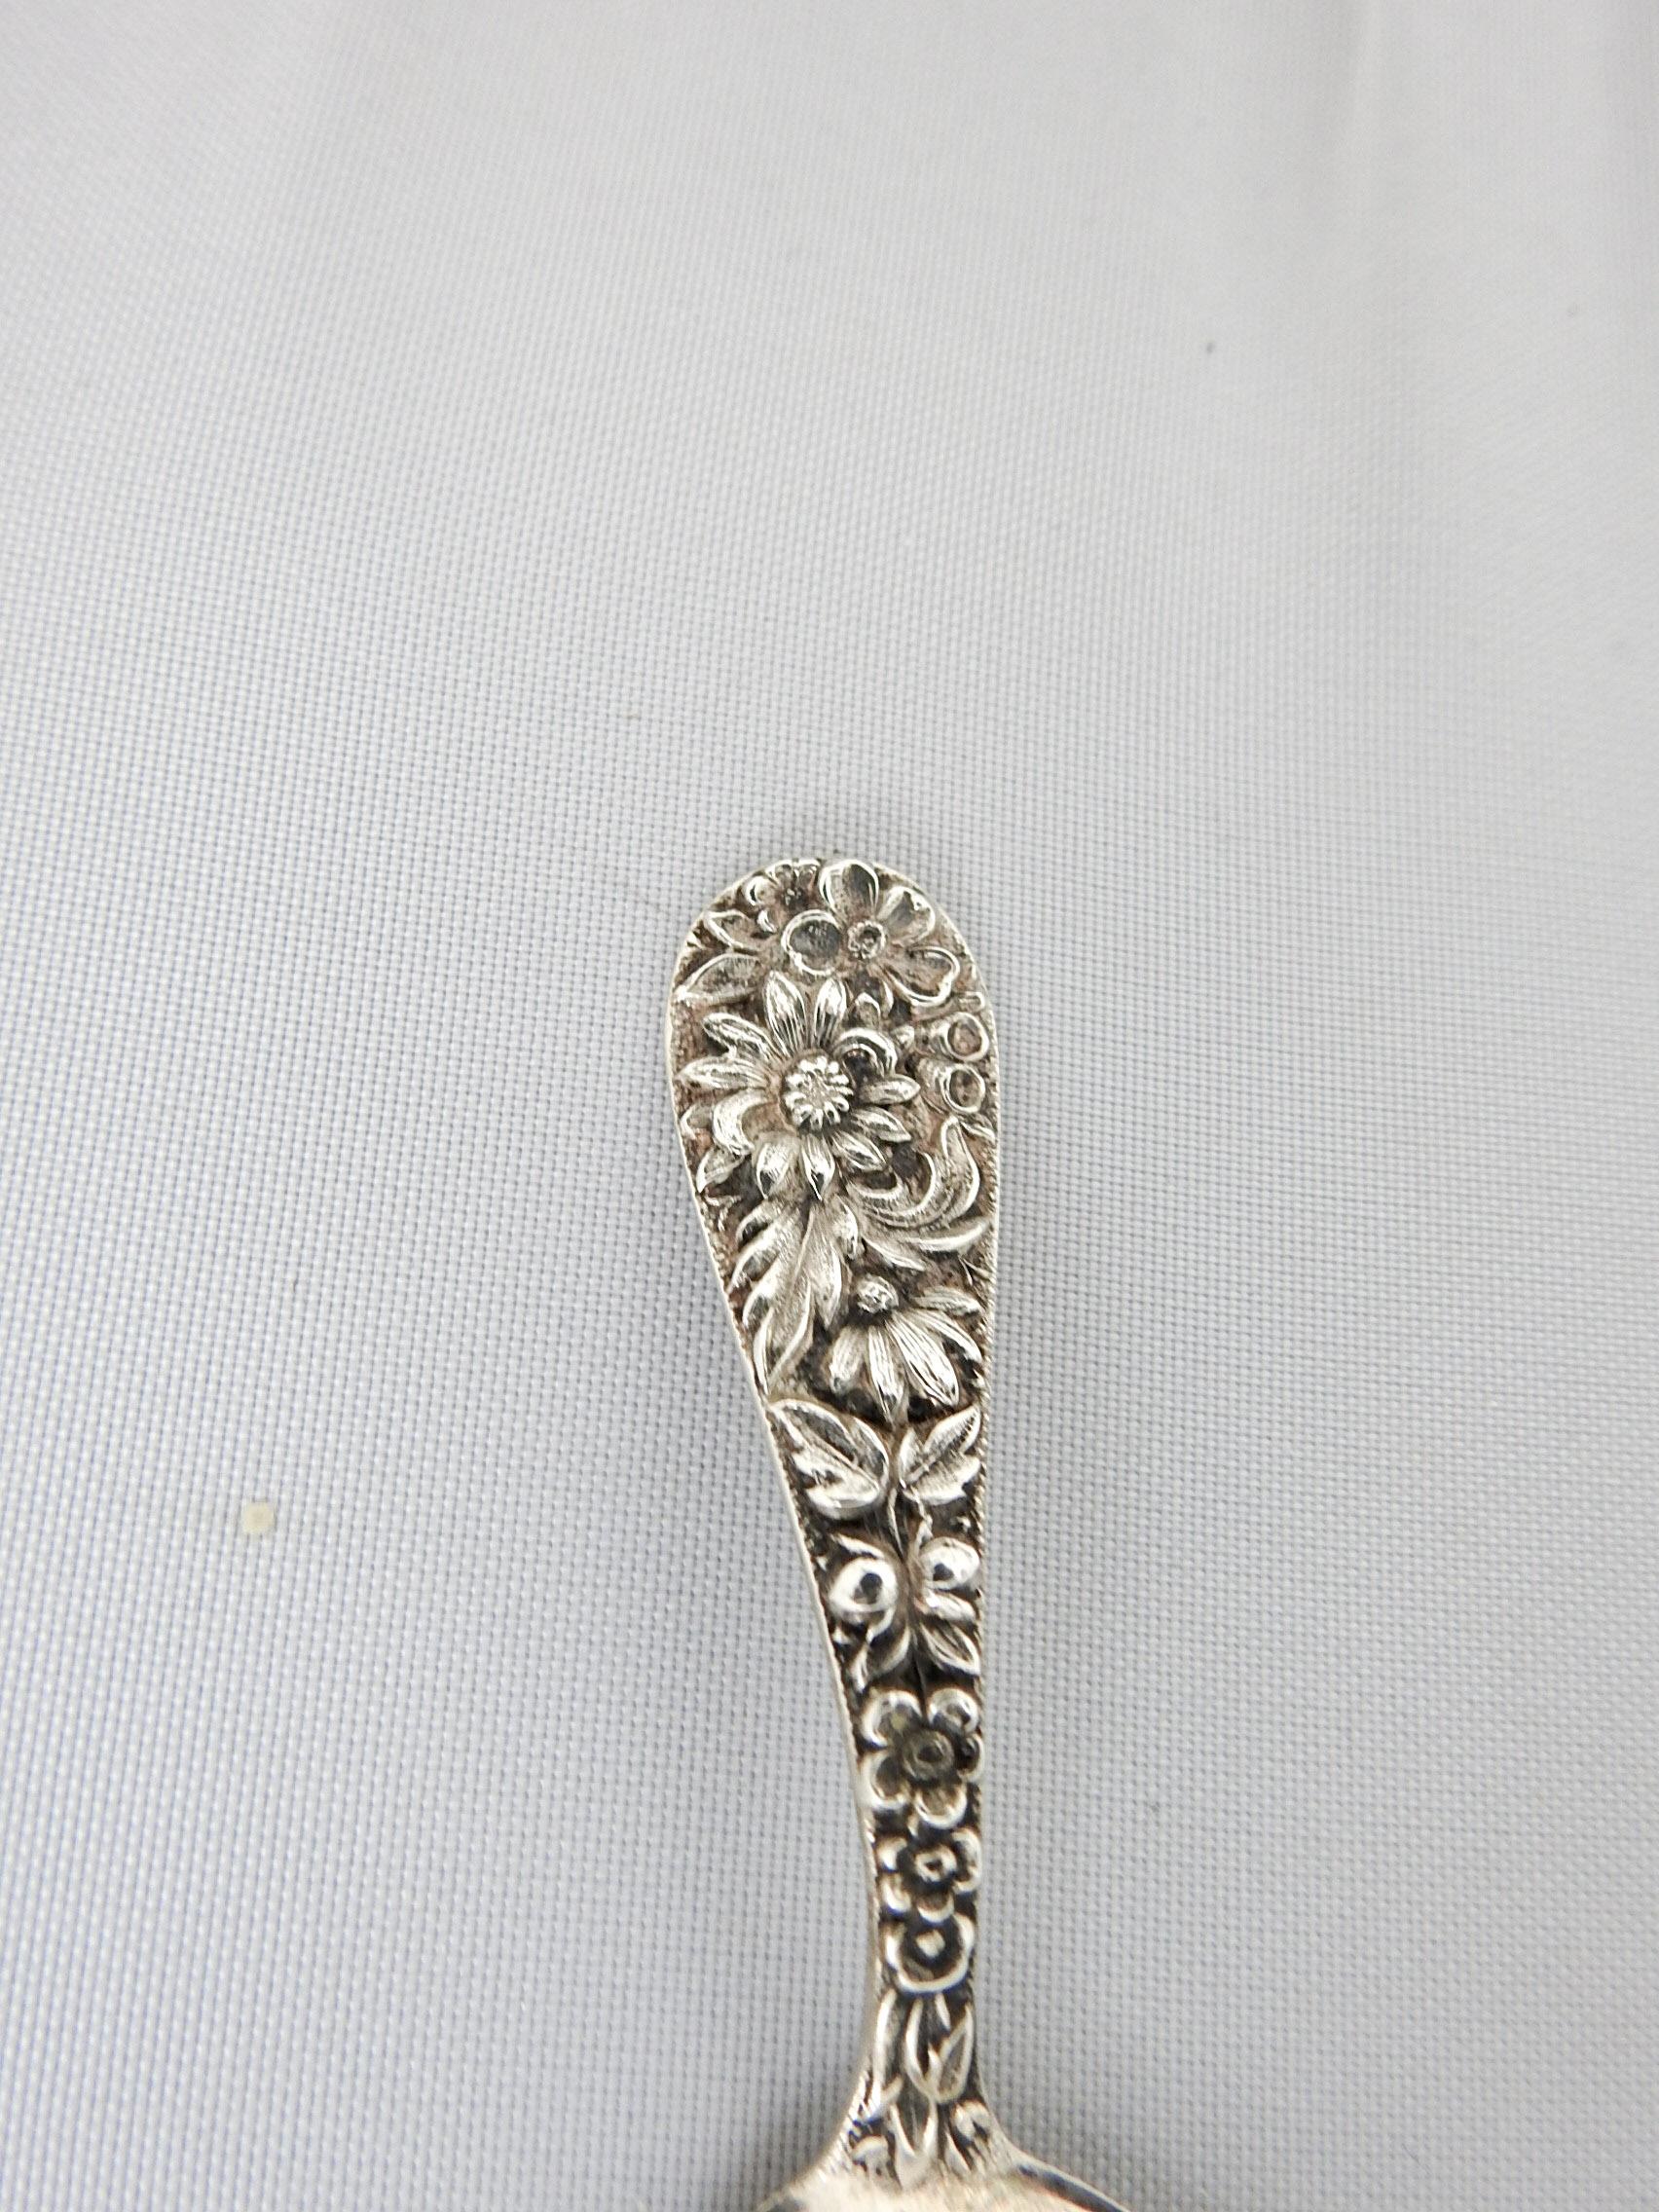 Vintage early 20th century Kirk & Son sterling silver baby spoon in Repoussé pattern. Marked on back, minor wear.